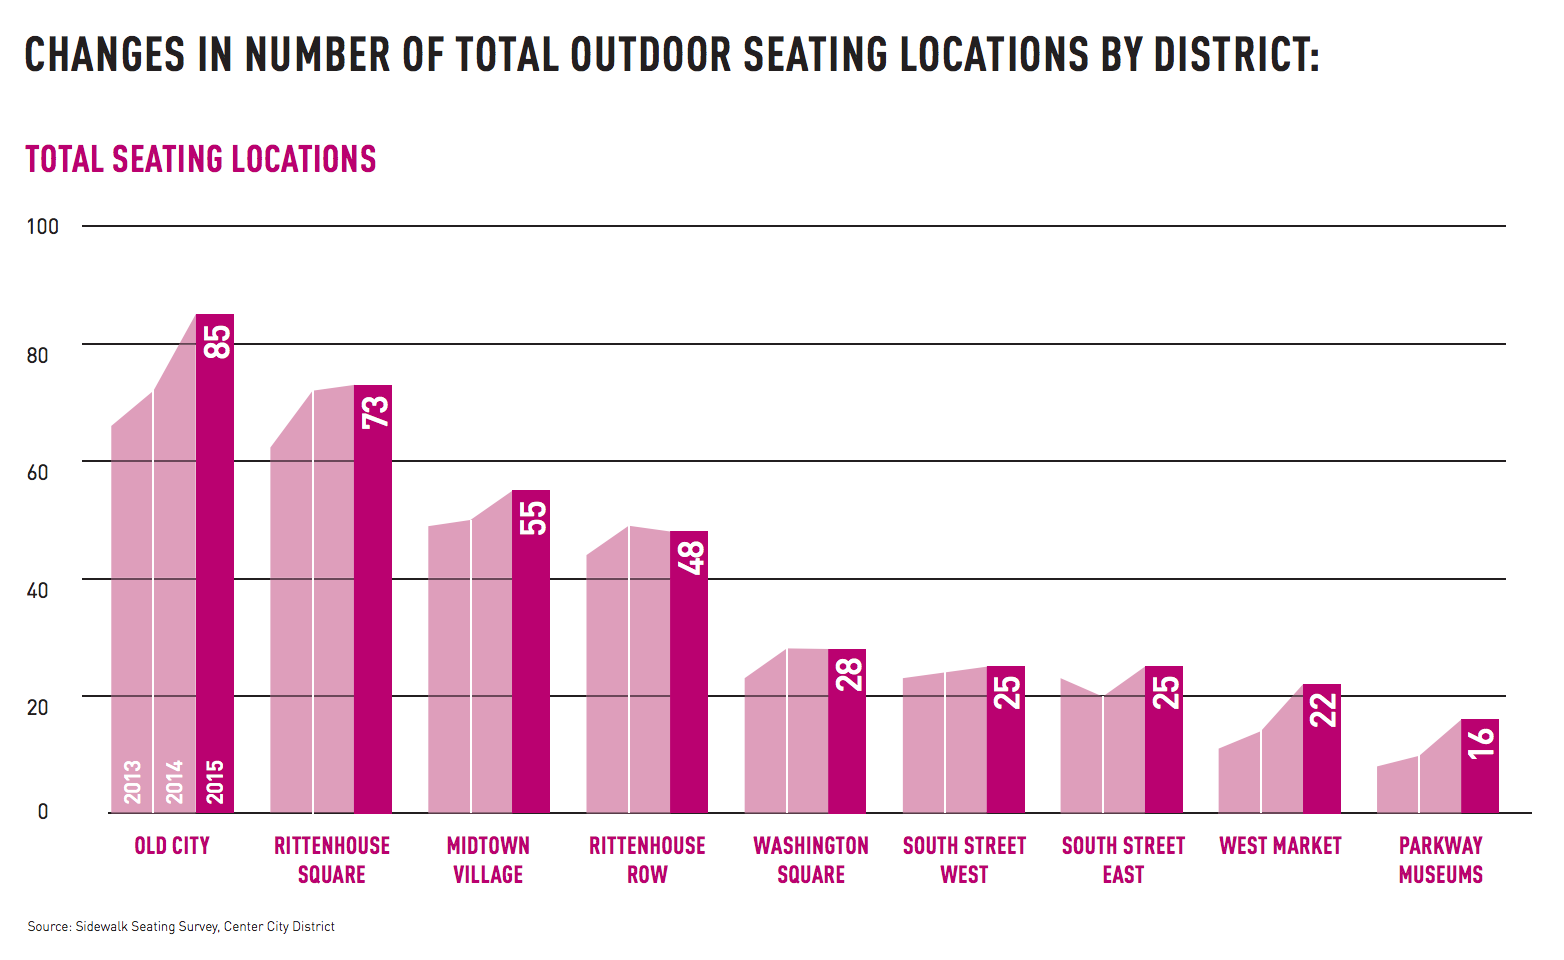 Changes in number of total outdoor seating locations by district